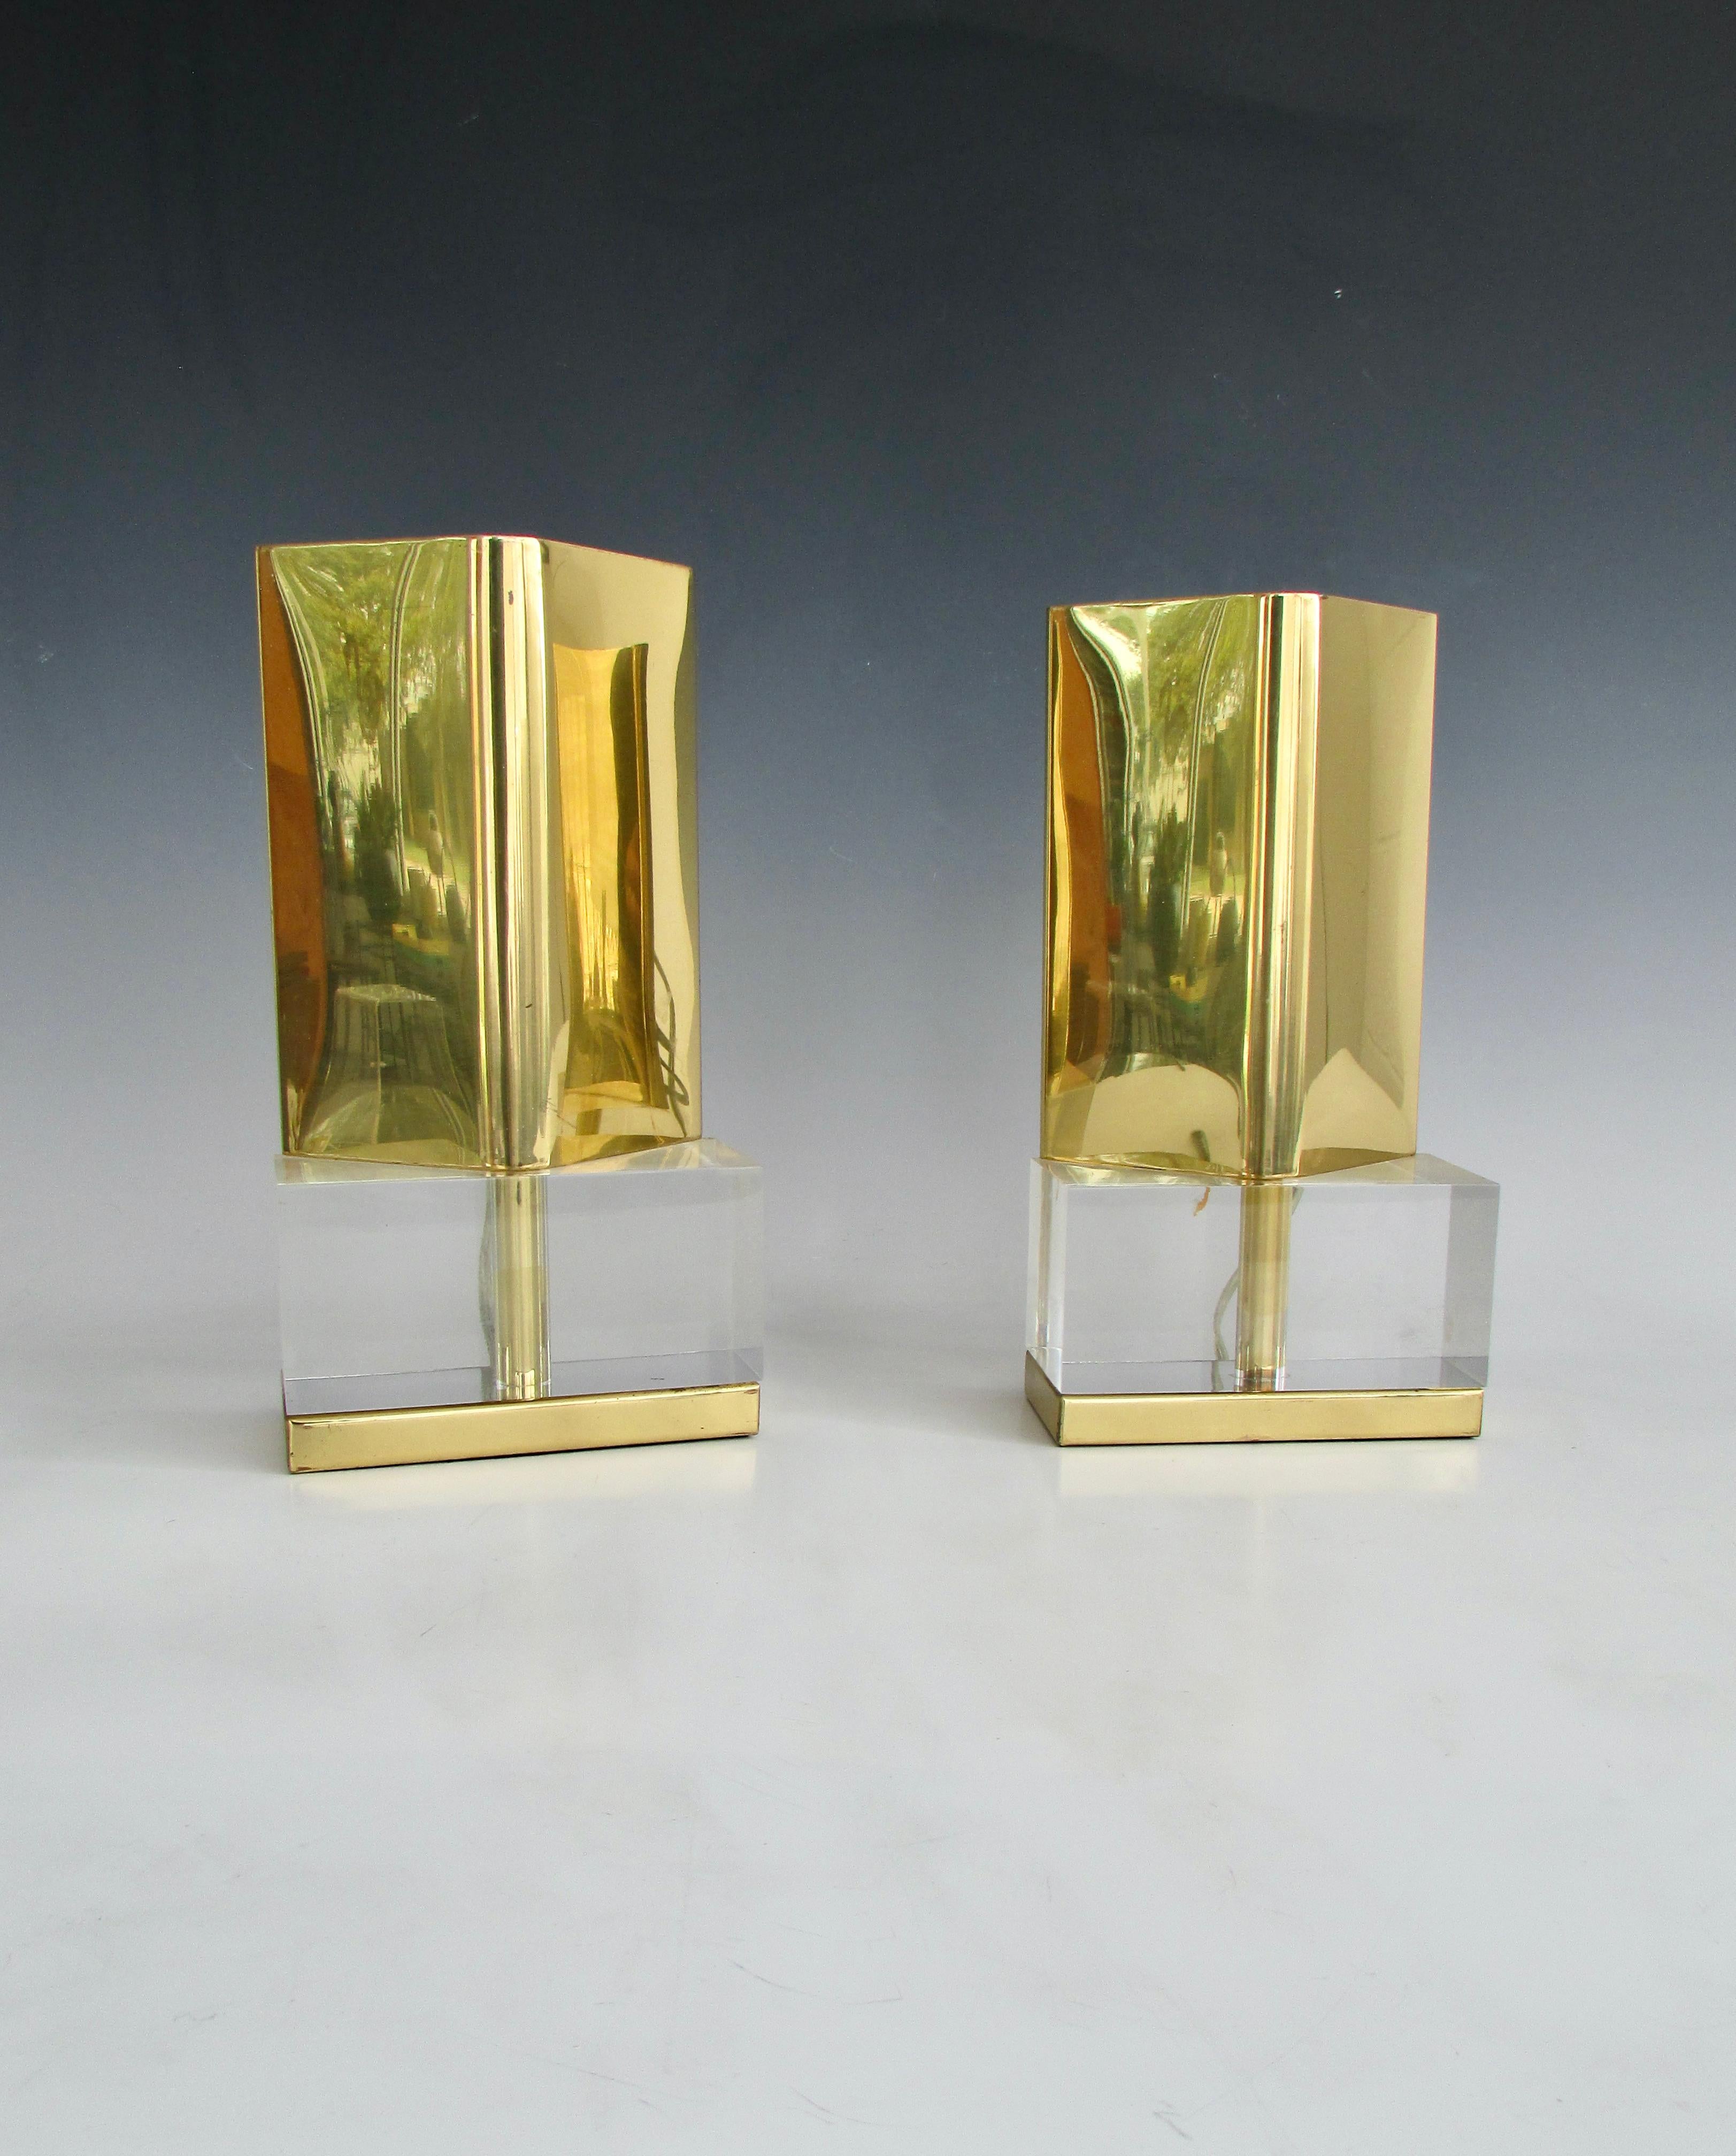 Brass Cedric Hartman style deflectors mounted on Lucite bases. Joined together to create these table top or shelf mounted sconces. Retain original Chapman label.